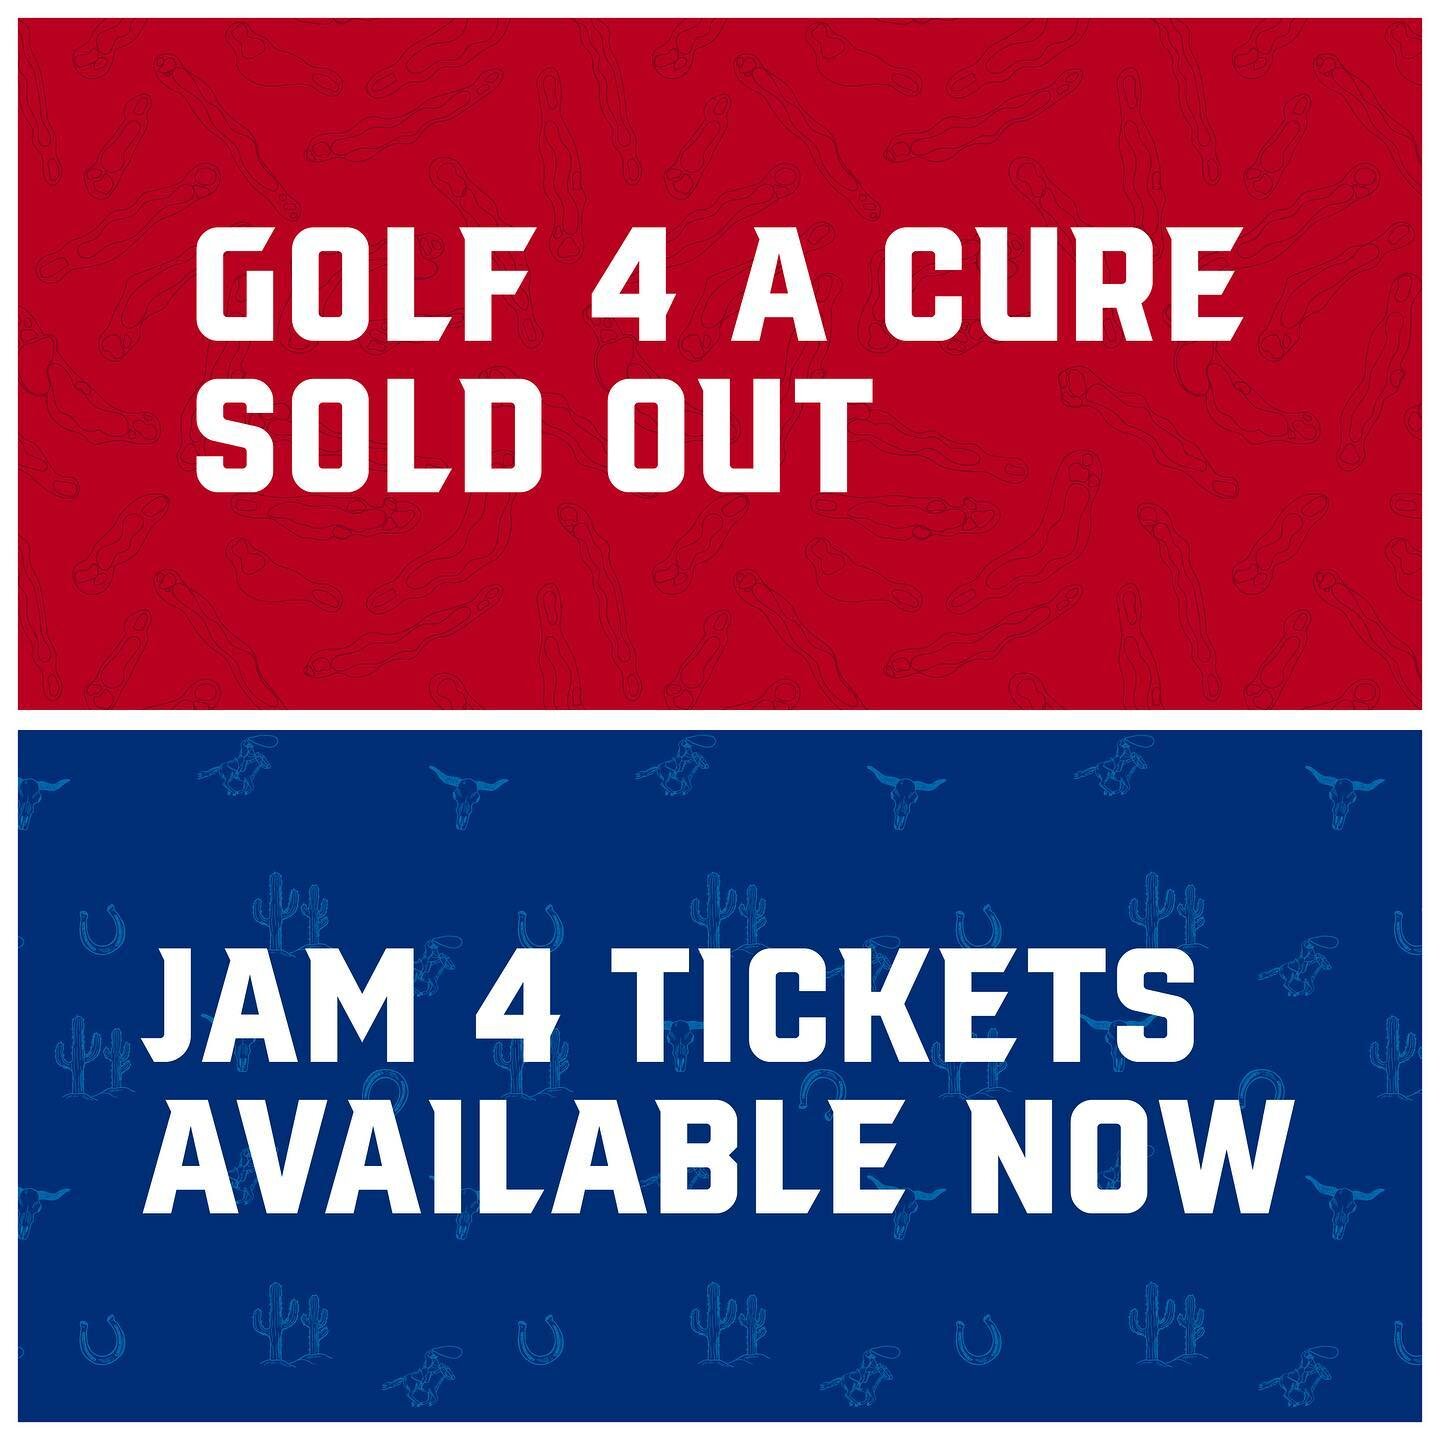 Golf 4 a Cure registration sold out in record time during the pre-sale yesterday! A big thank you to all the early participants who secured their spots. If you missed out, don't worry &ndash; you can still join our waitlist. And here's some more exci